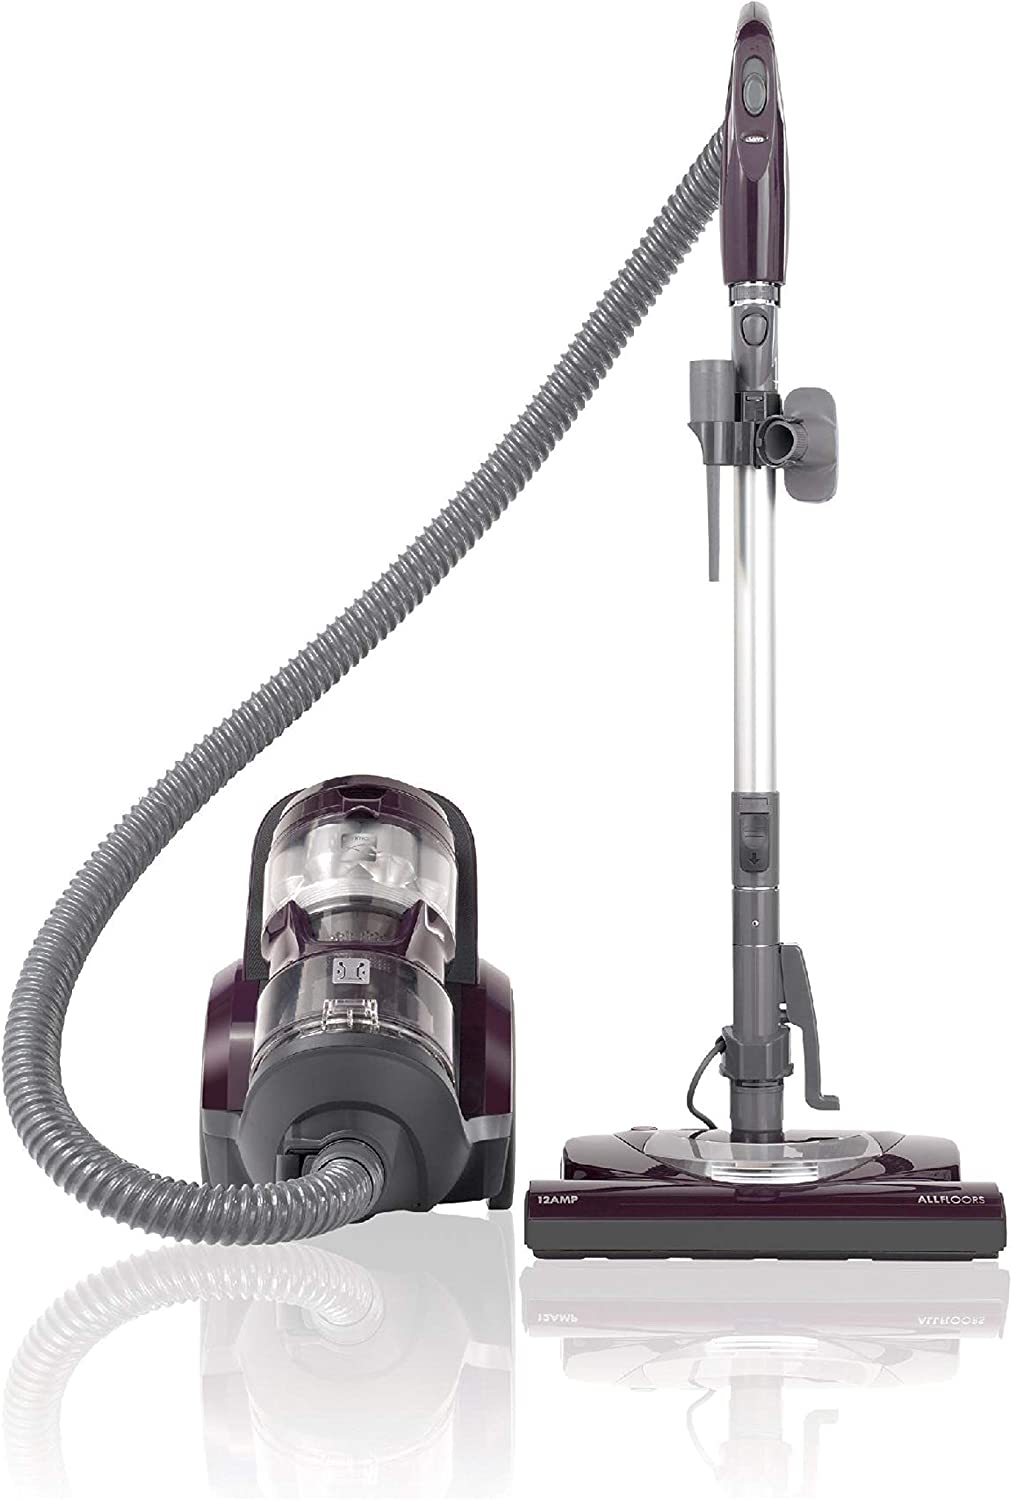 Kenmore Canister Bagless Vacuum 22614 Pet Friendly With Turbine Brush